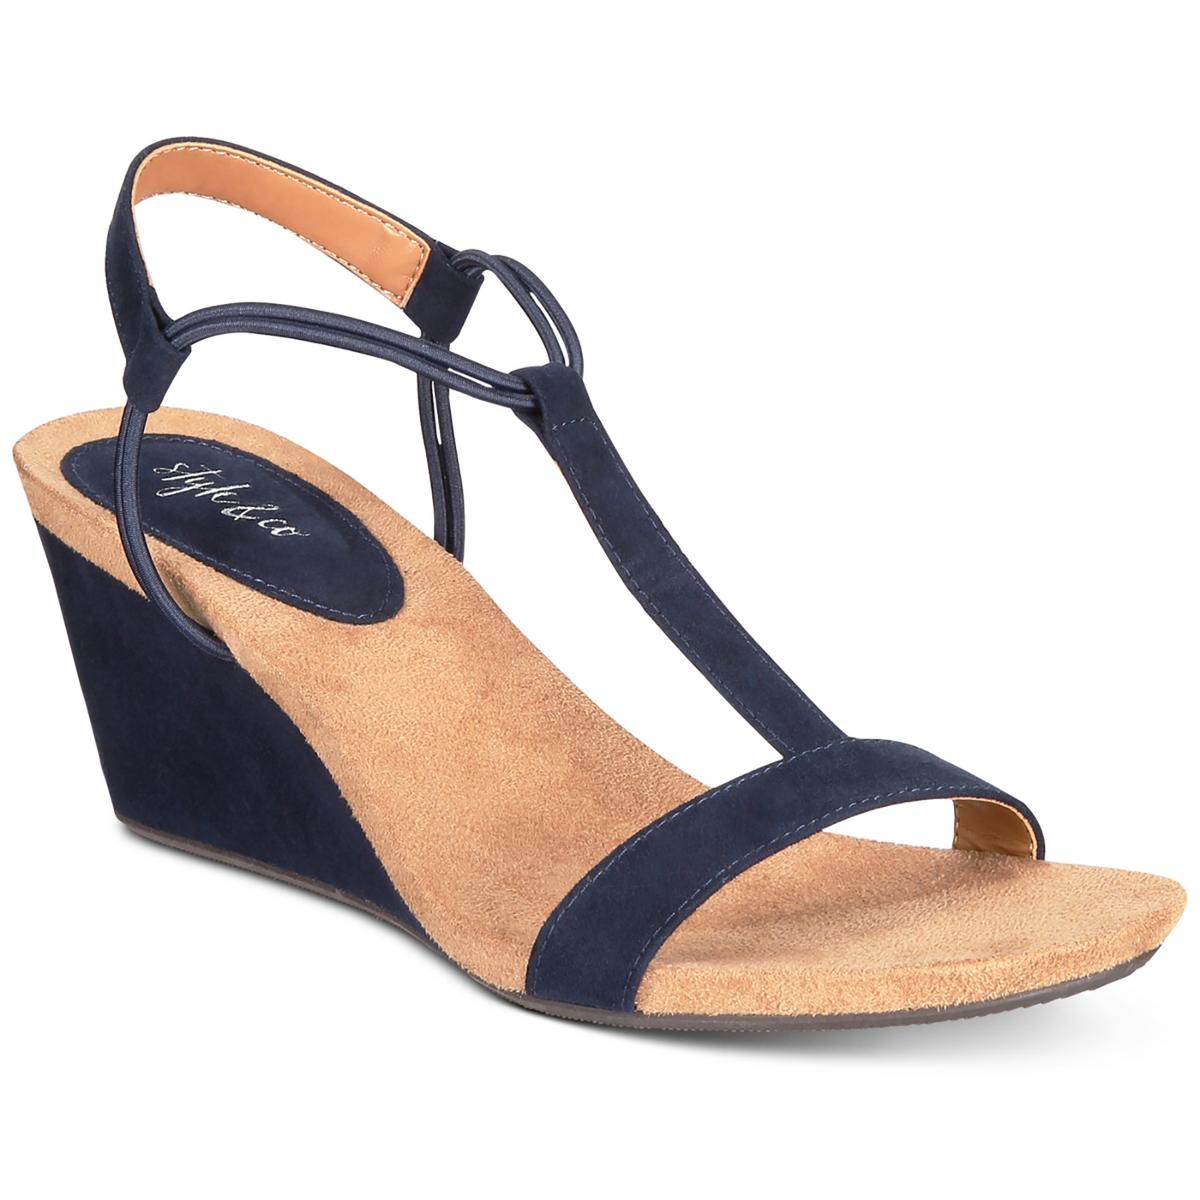 Style & Co. Mulan Womens T-strap Wedge Sandals